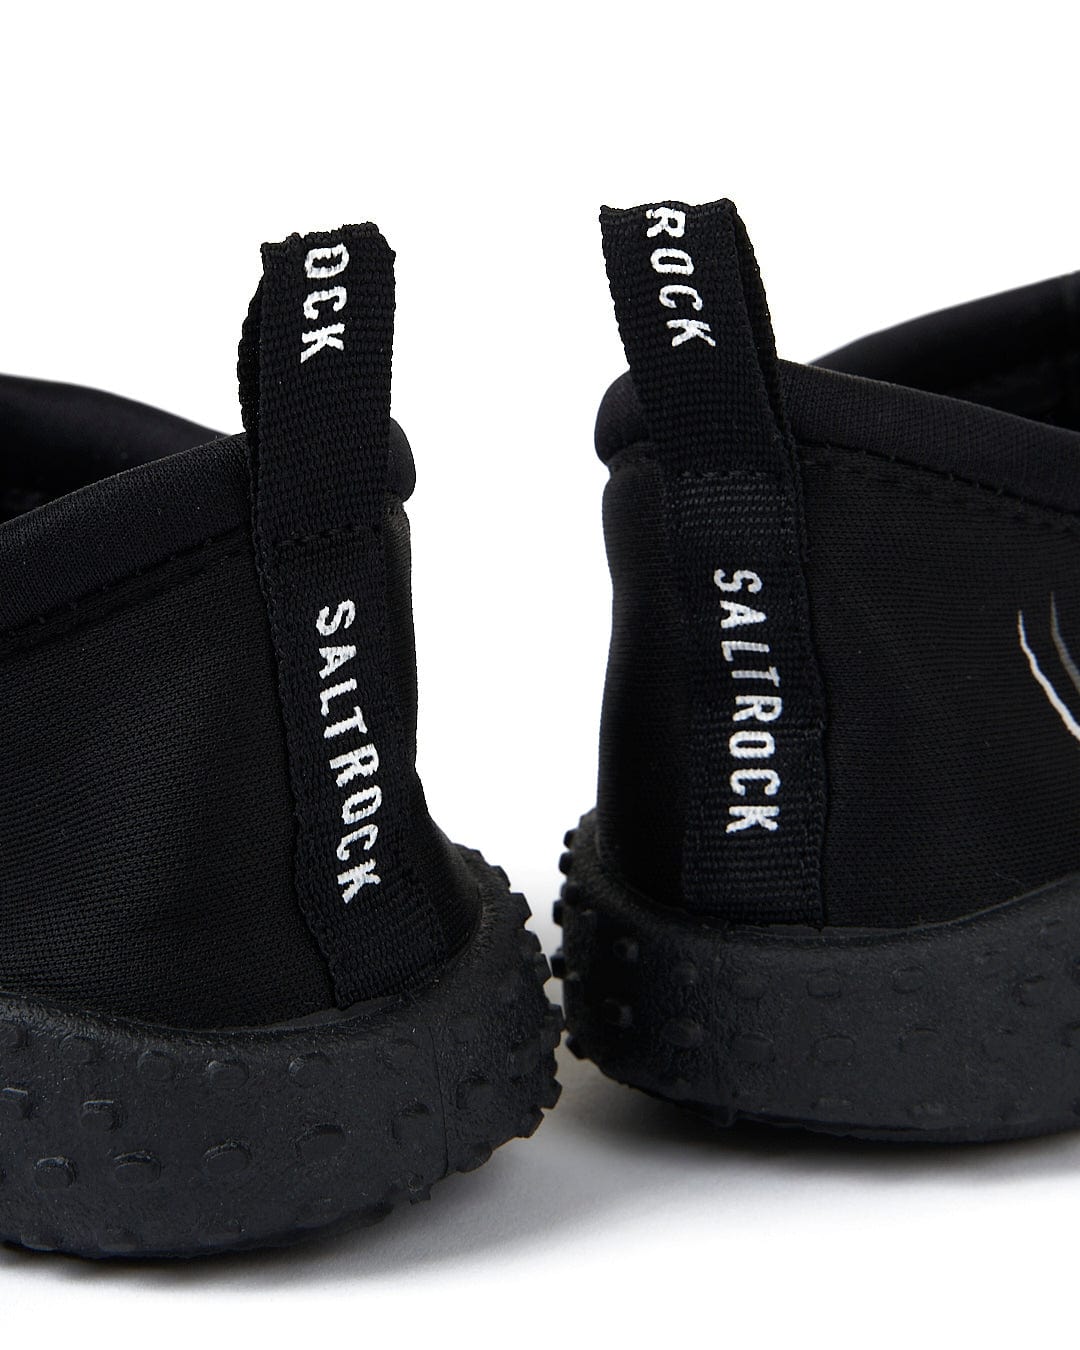 Core Aqua Shoe - Black slip-on shoes with Saltrock text on the heel tabs, white logo on the side, against a white background.